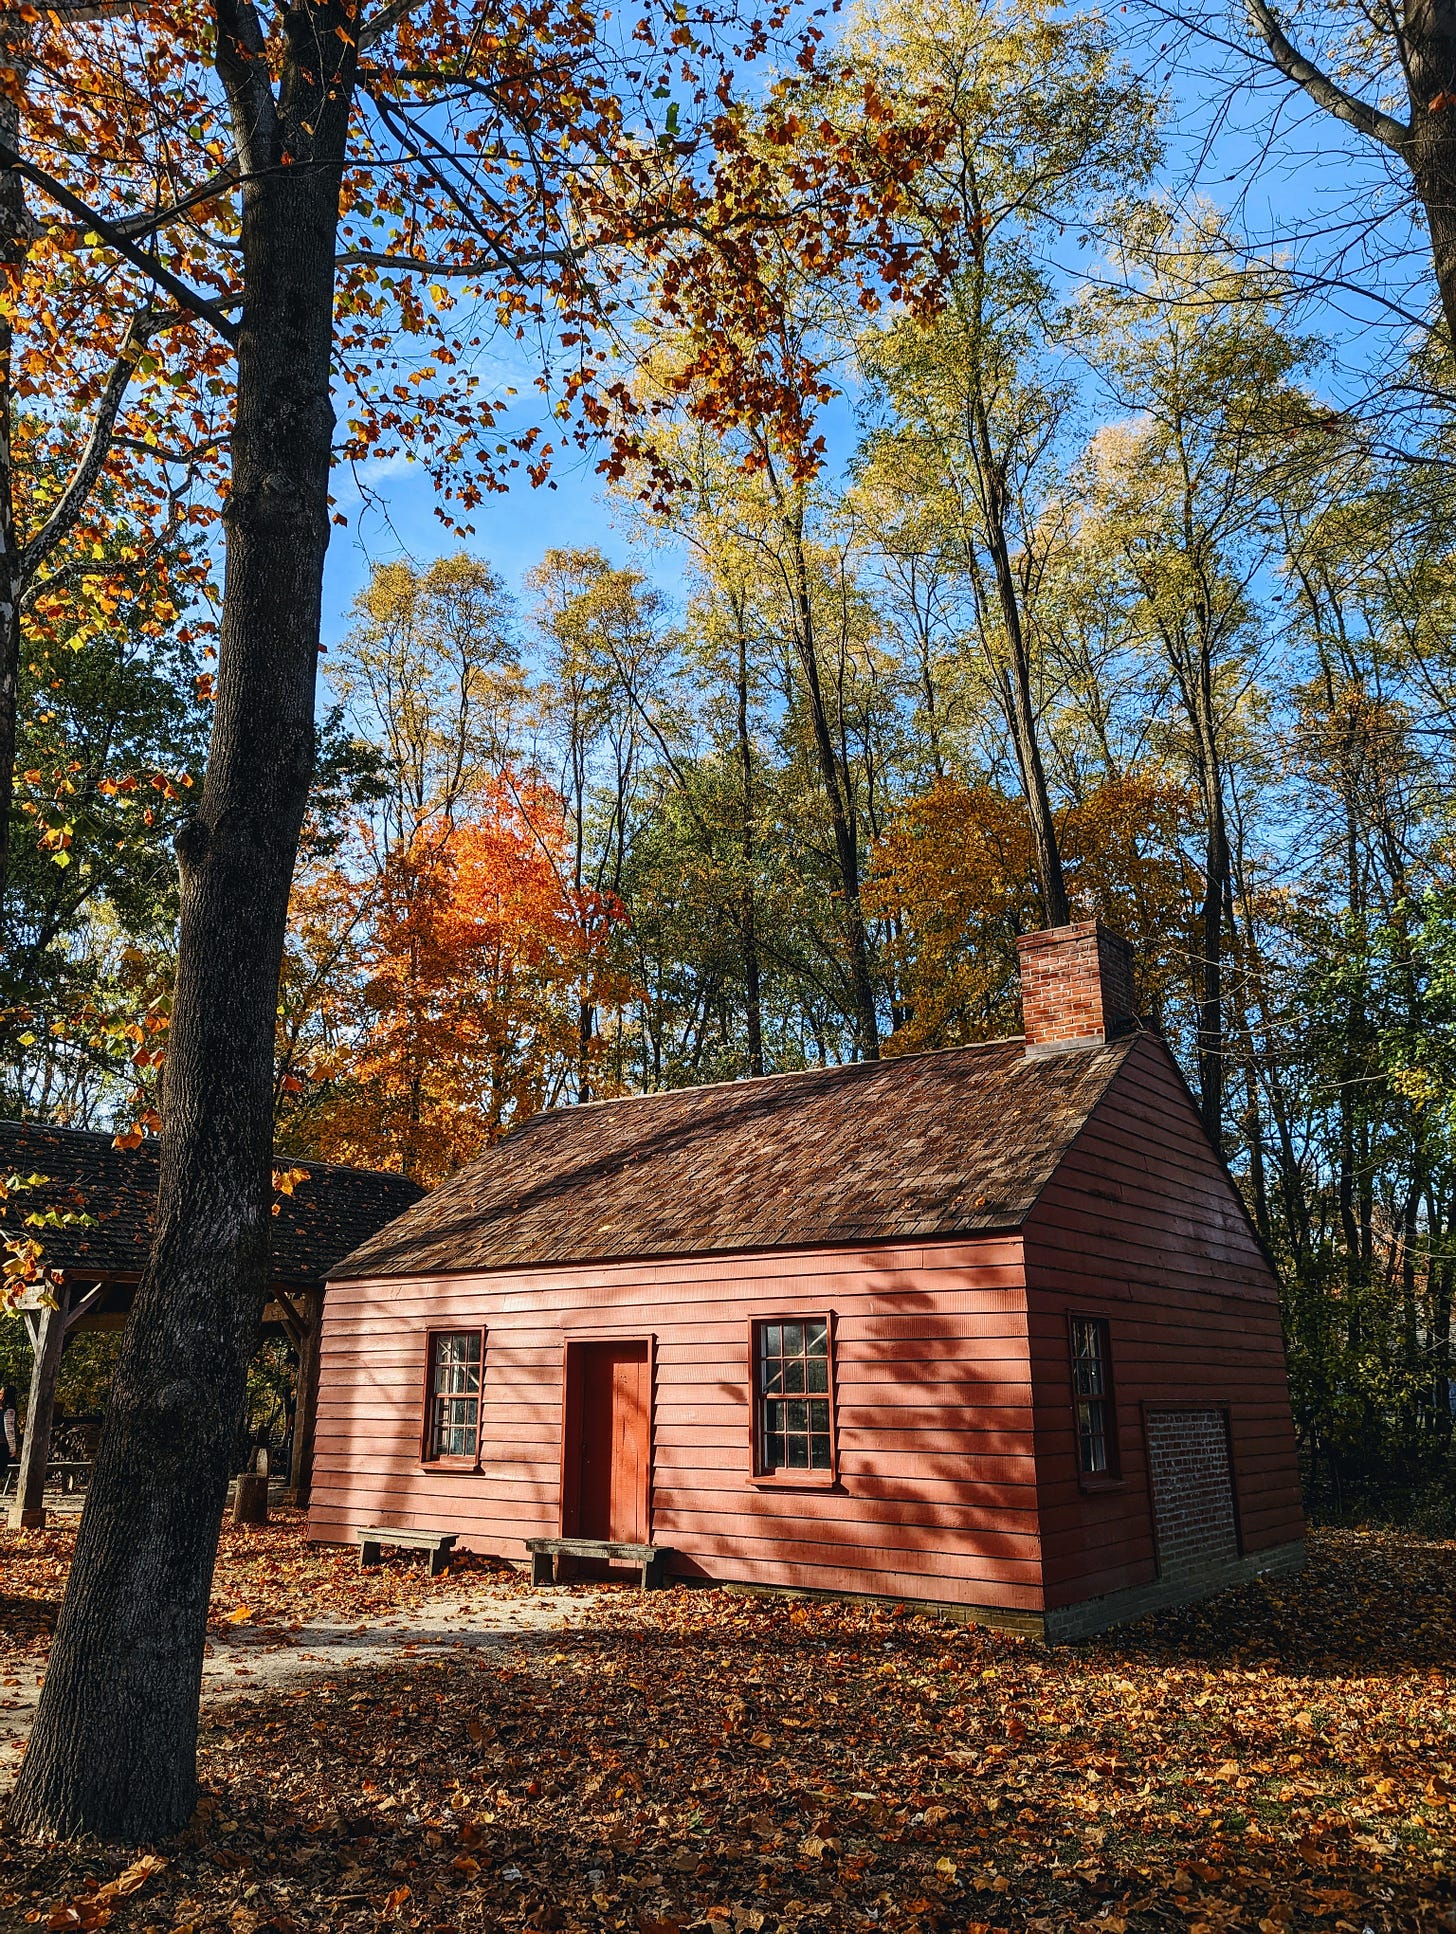 A charming red cabin sits among autumn leaves and trees in the fictional 1836 Prairie Town.